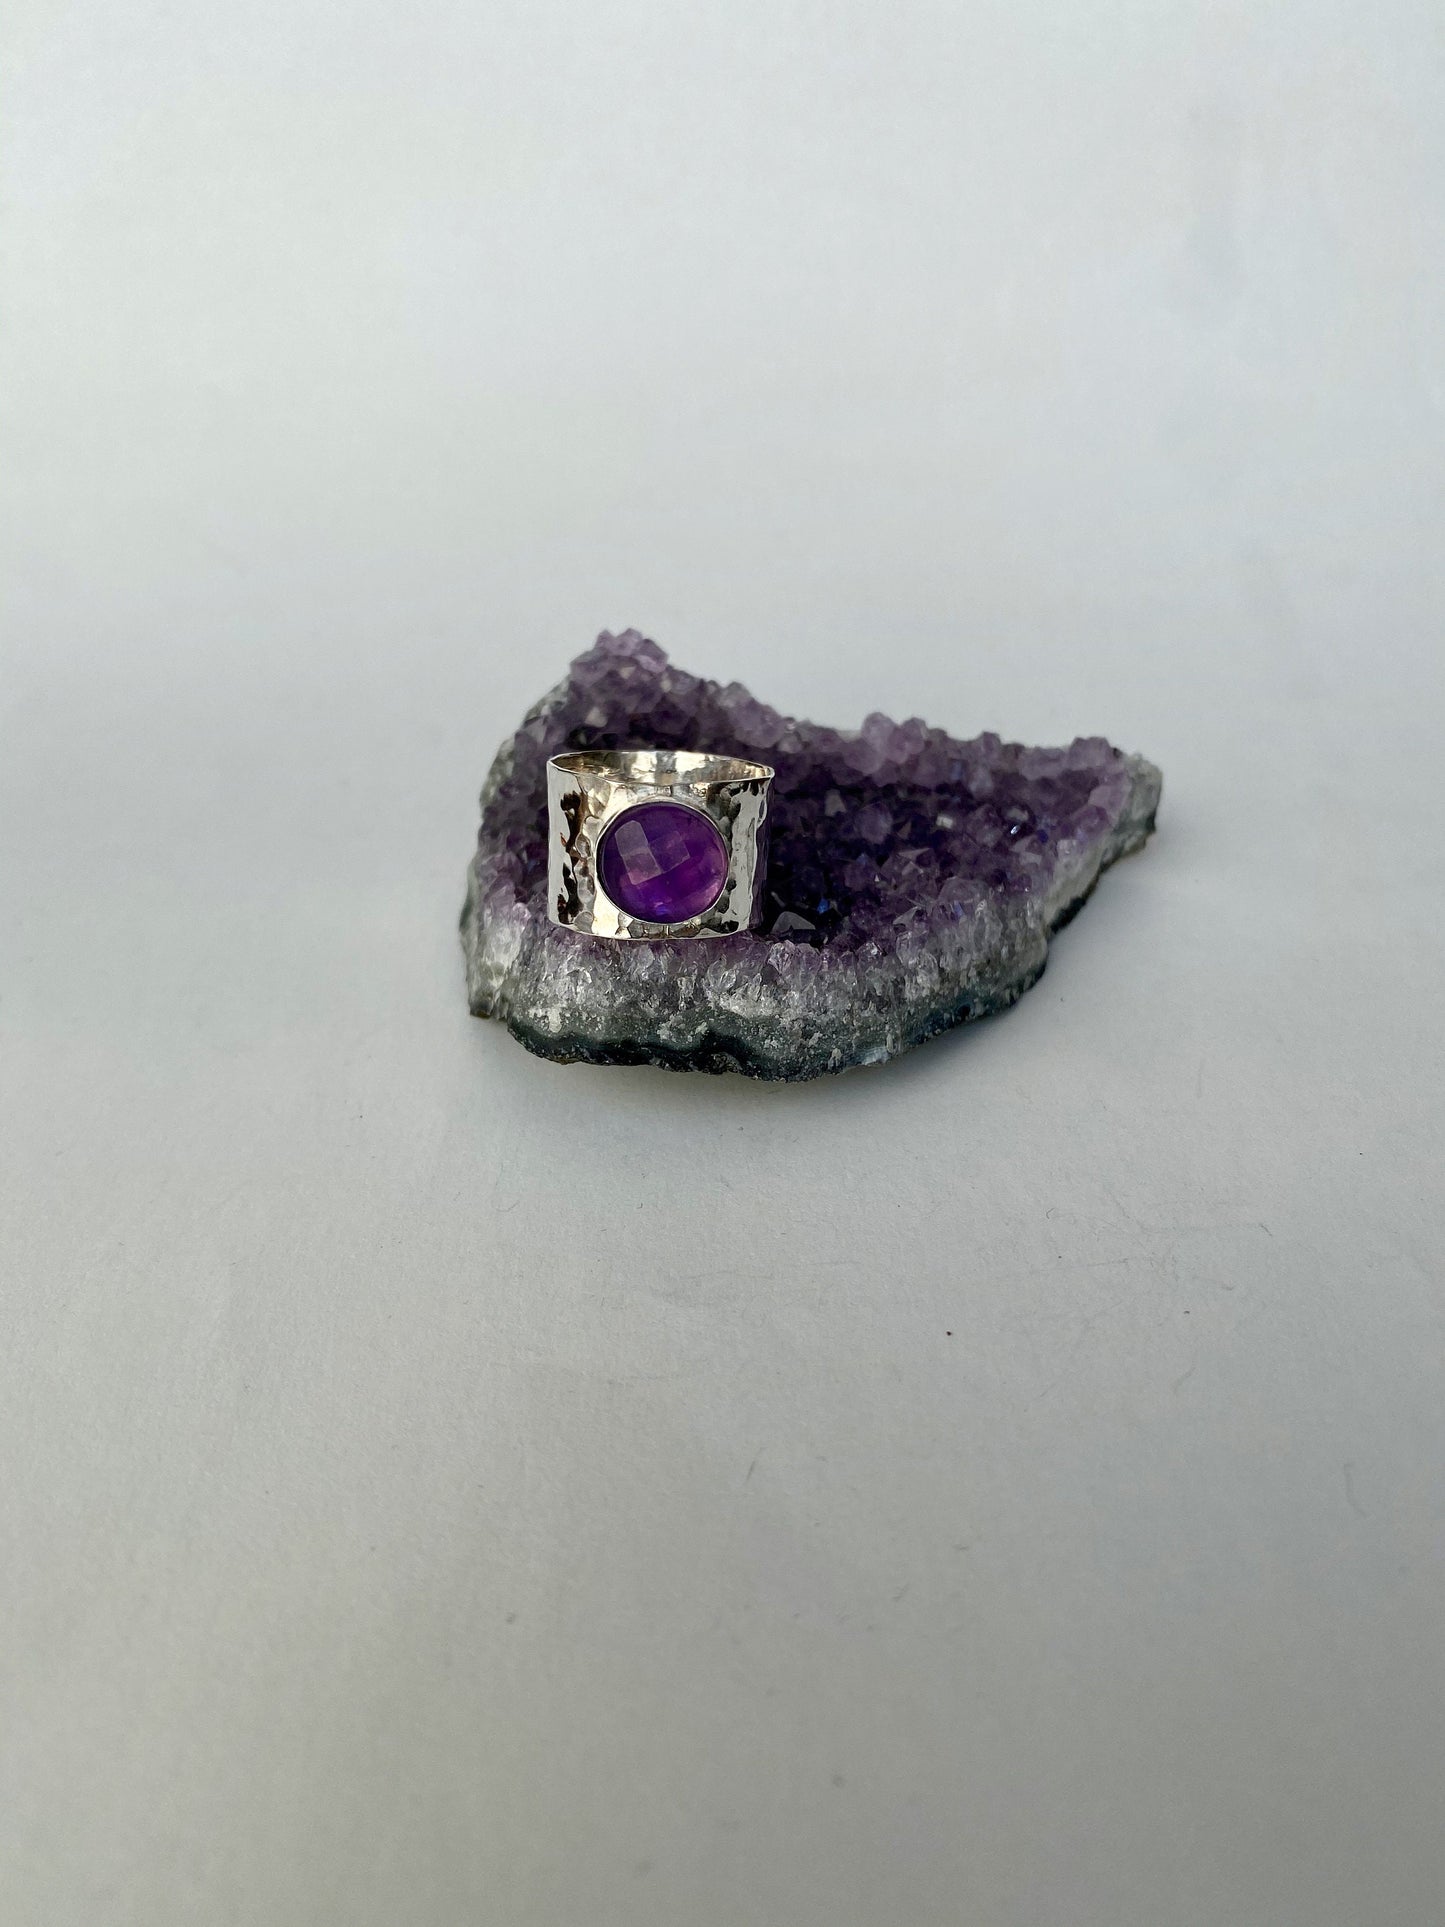 Striking size 6.5 handmade amethyst and sterling silver ring. Hammered band.